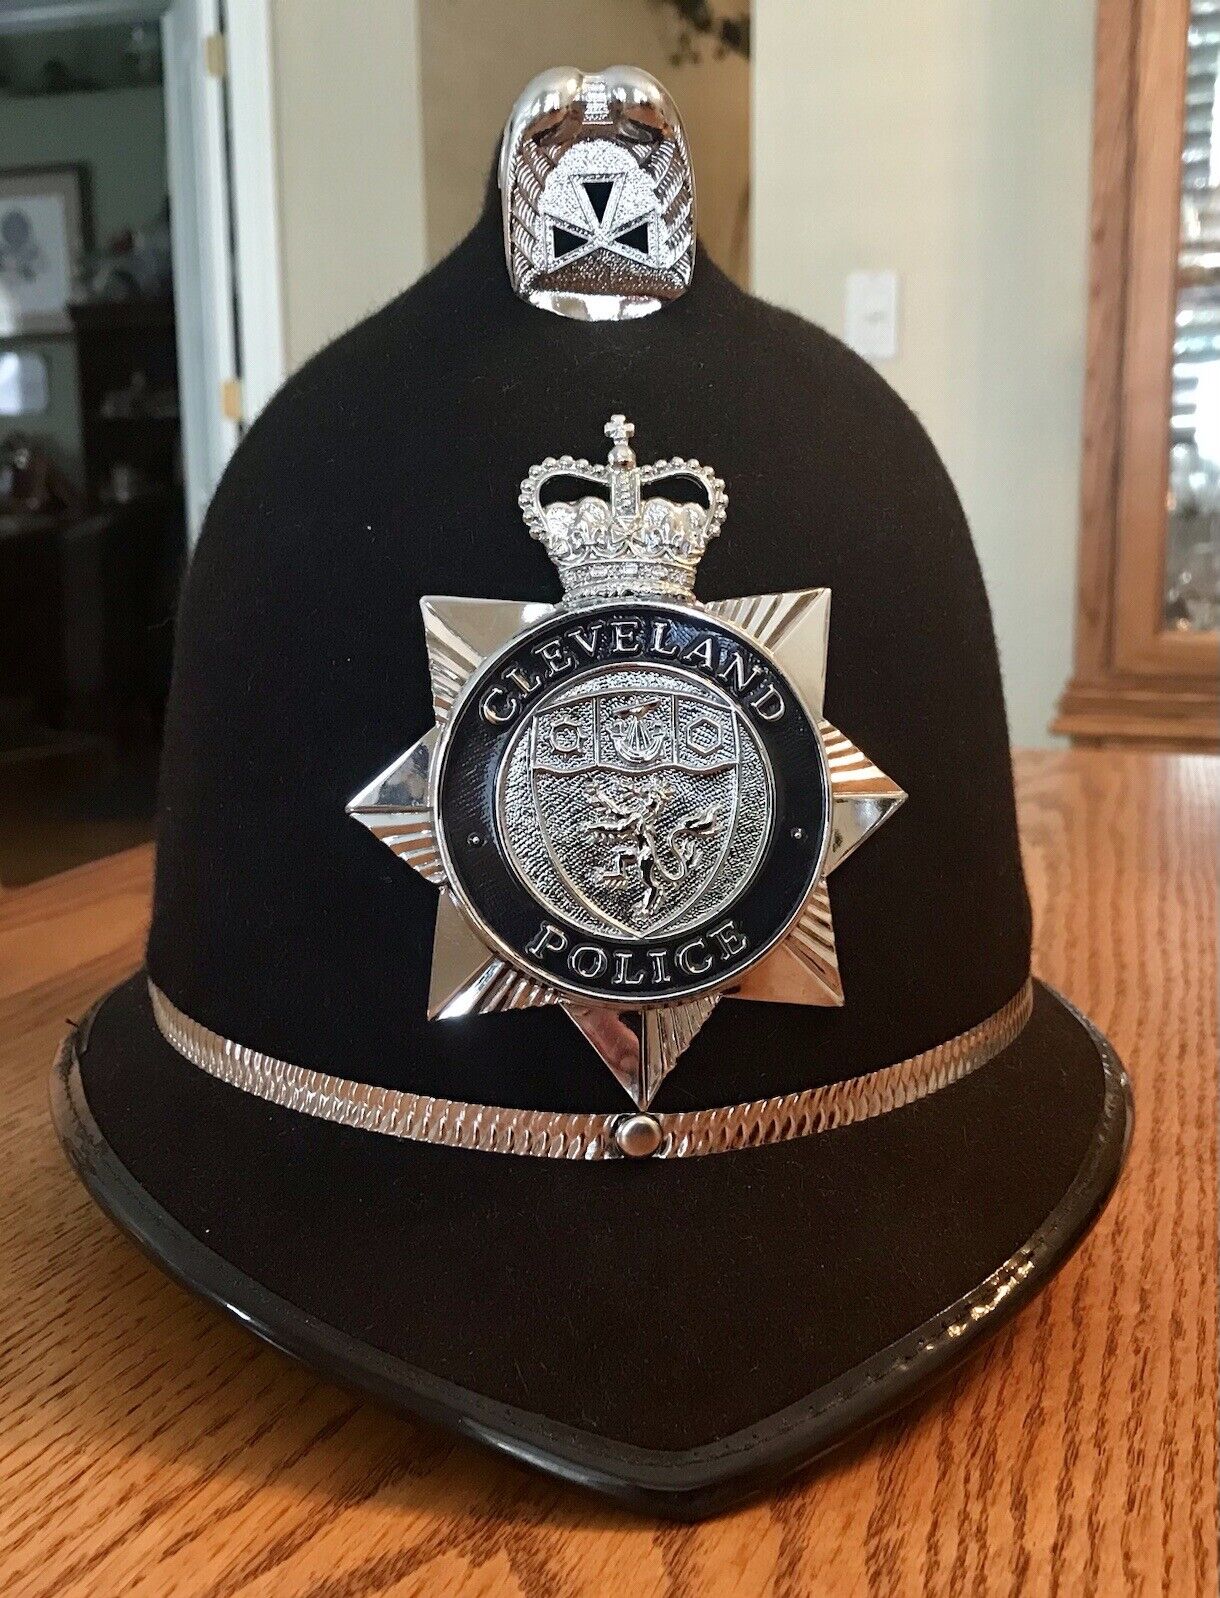 Vintage, Authentic British Police “ Bobby” Helmet - Ministry Of Cleveland Police